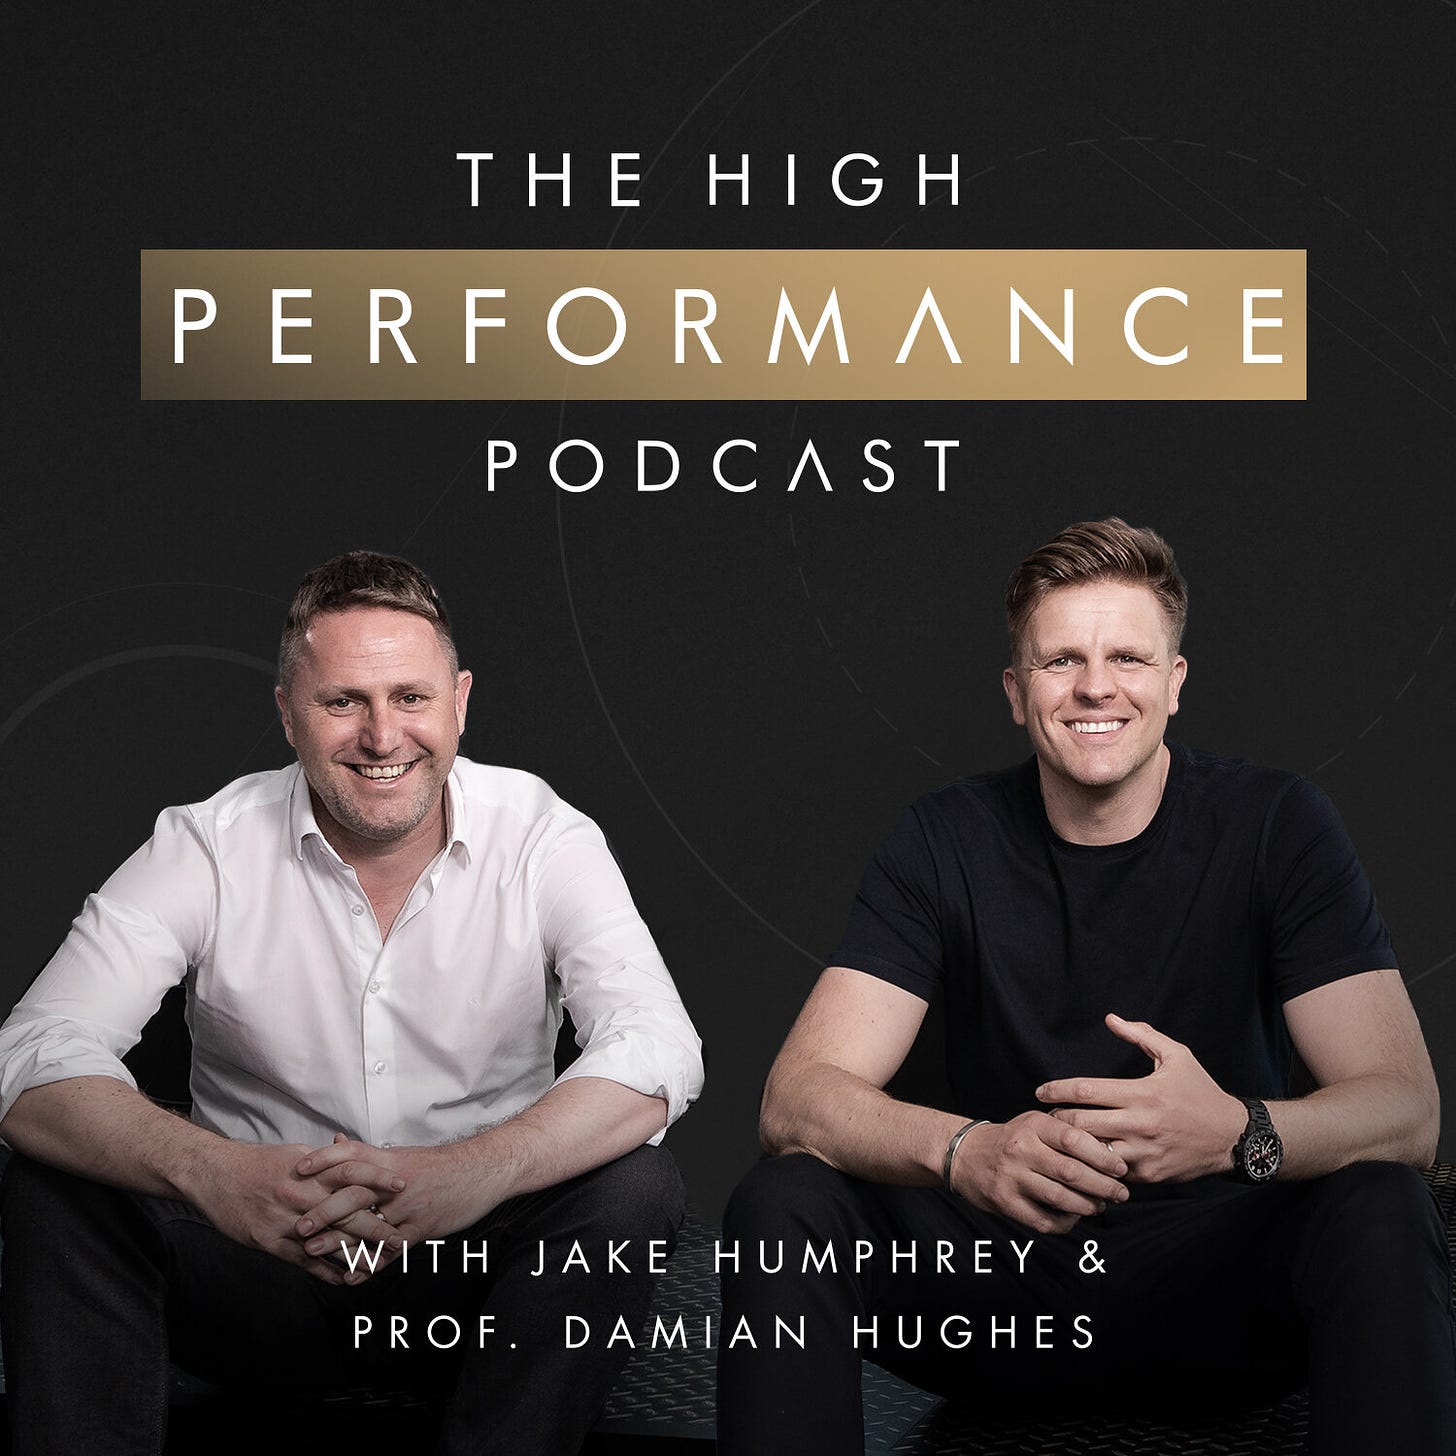 About — High Performance Podcast